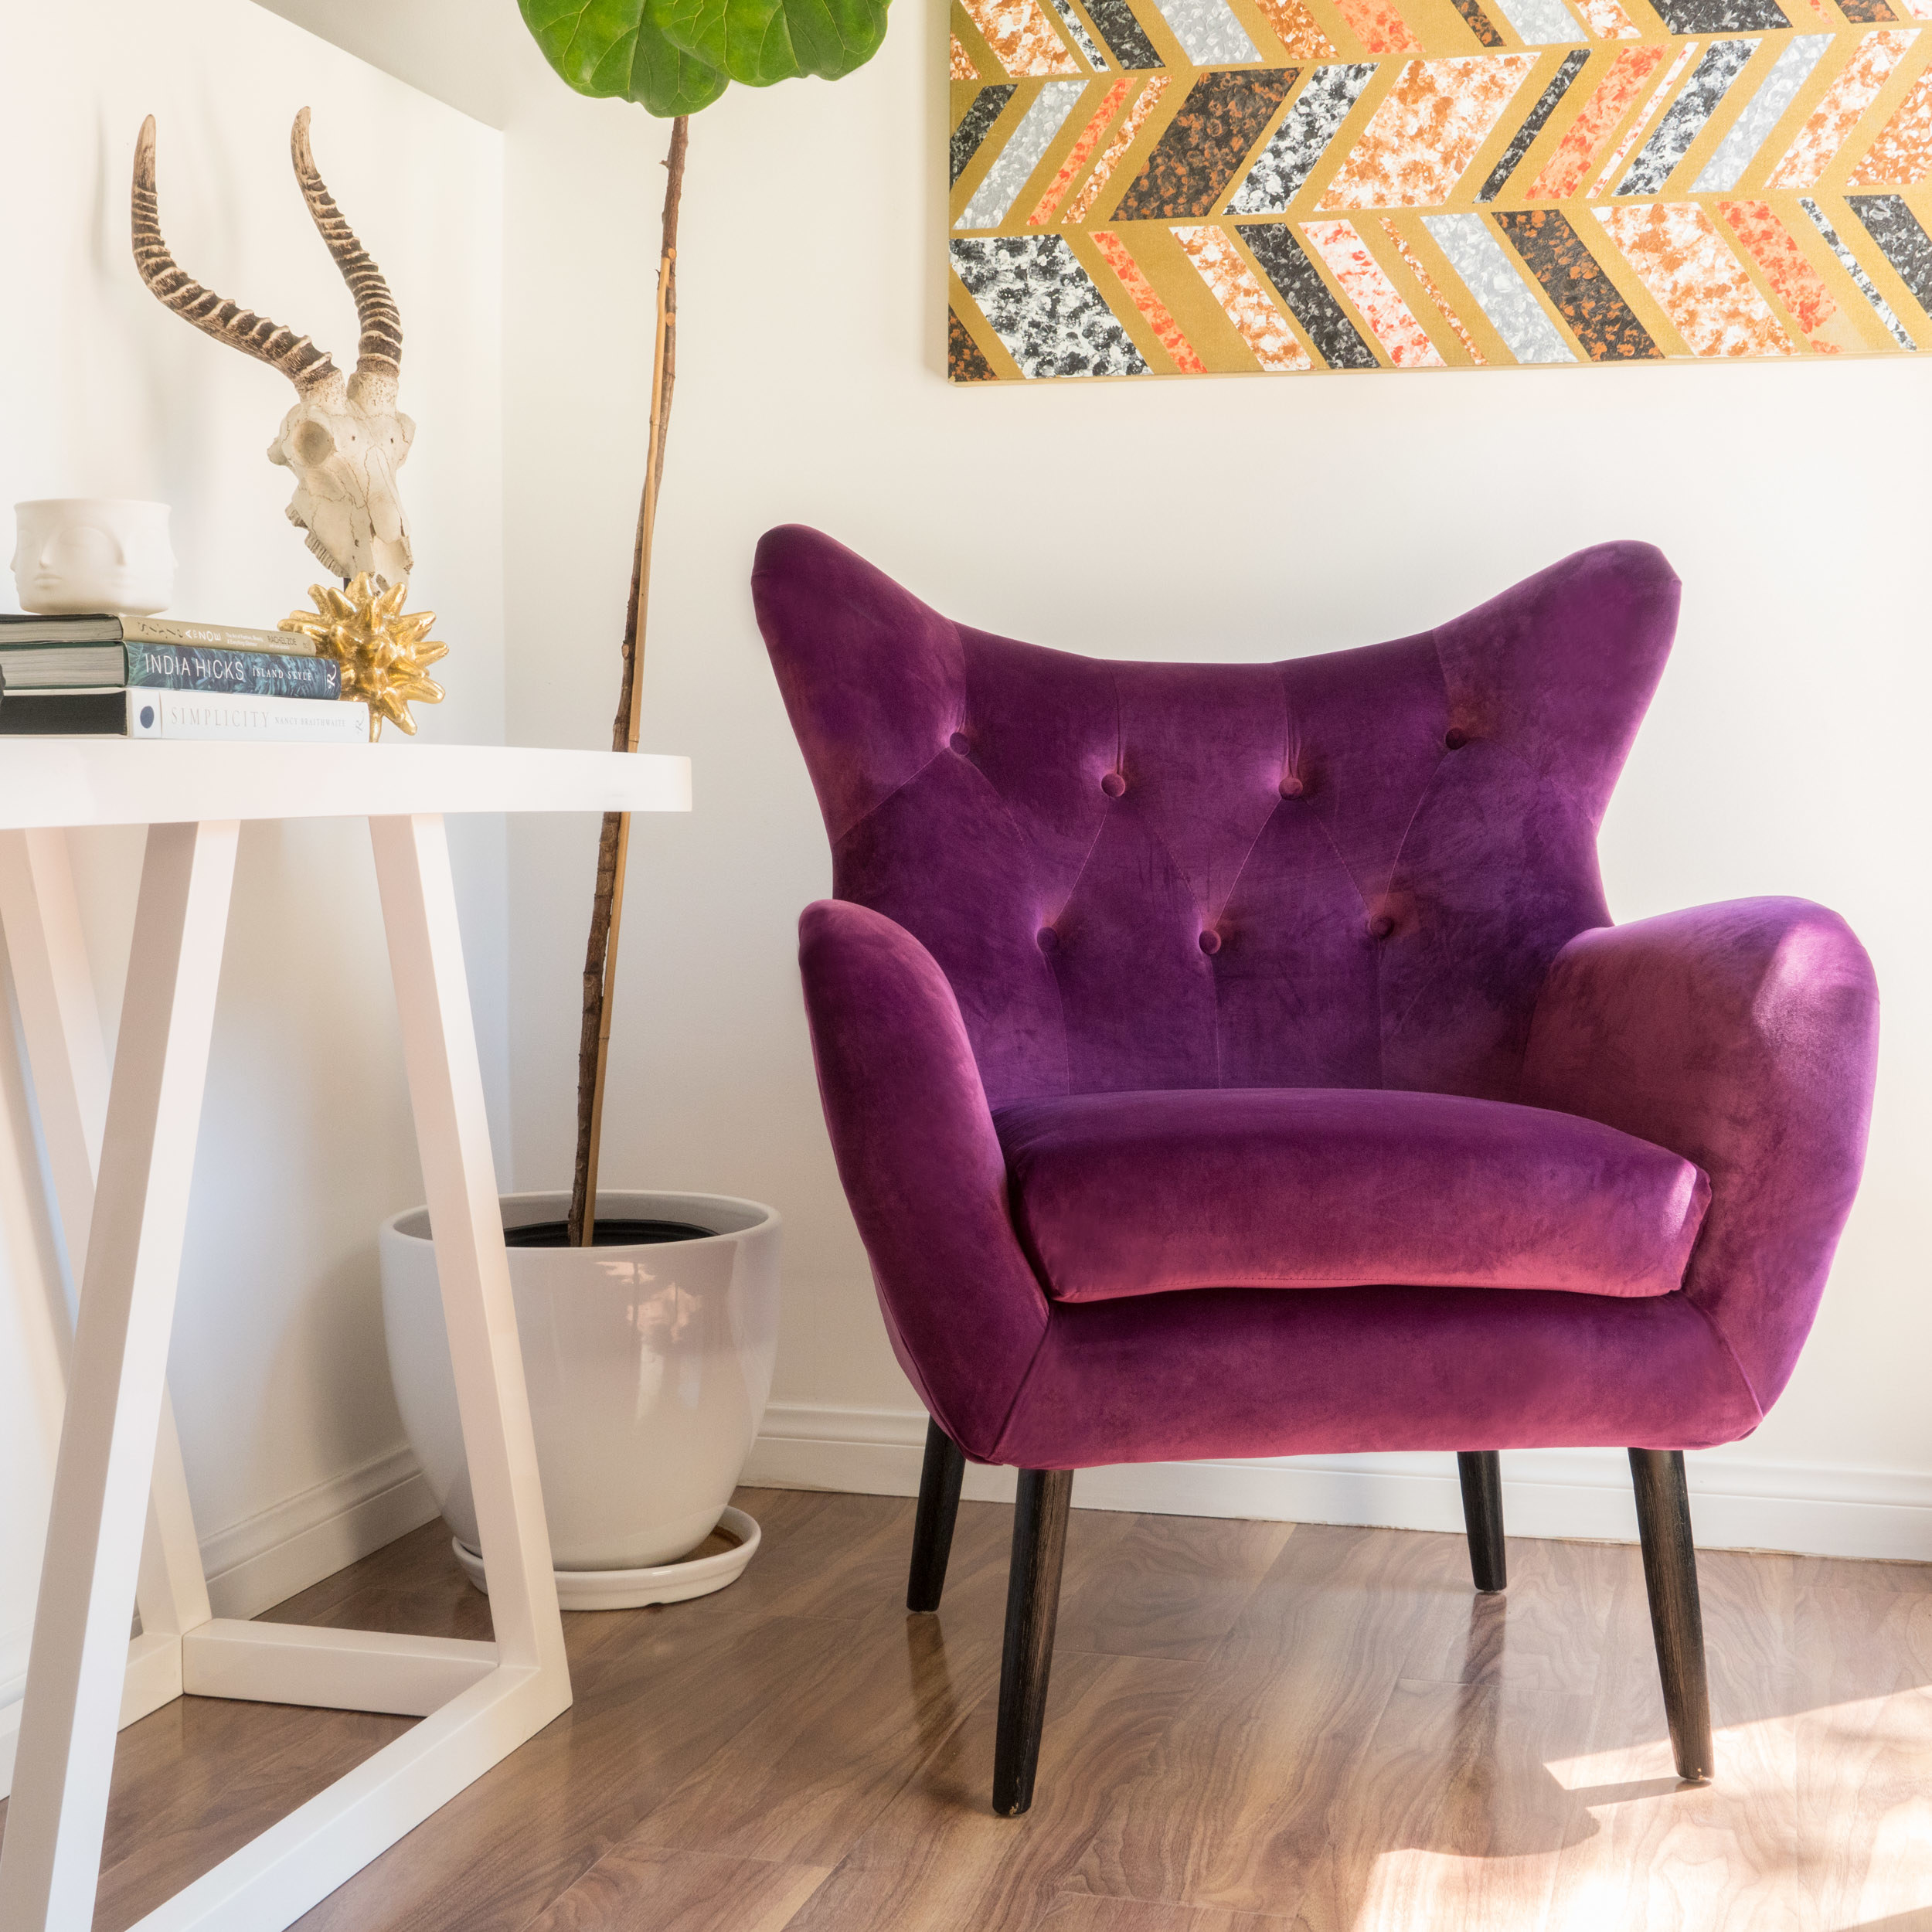 the violet accent chair